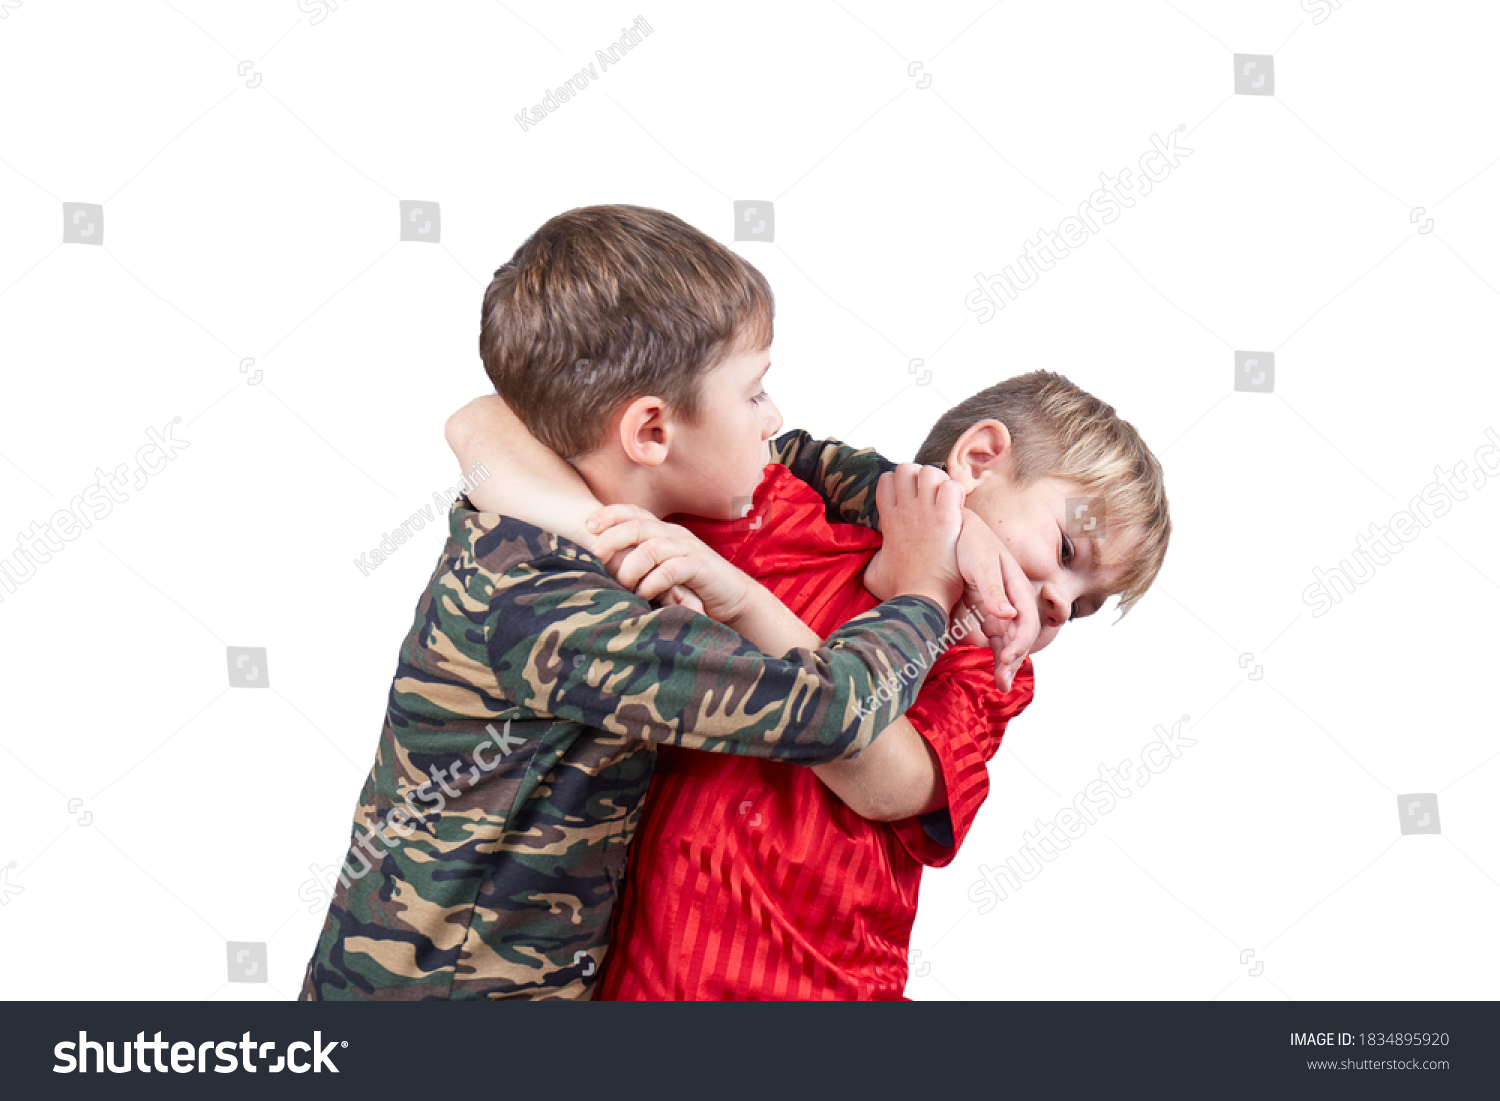 Two boy athlete performing grip release technique on white isolated background #1834895920